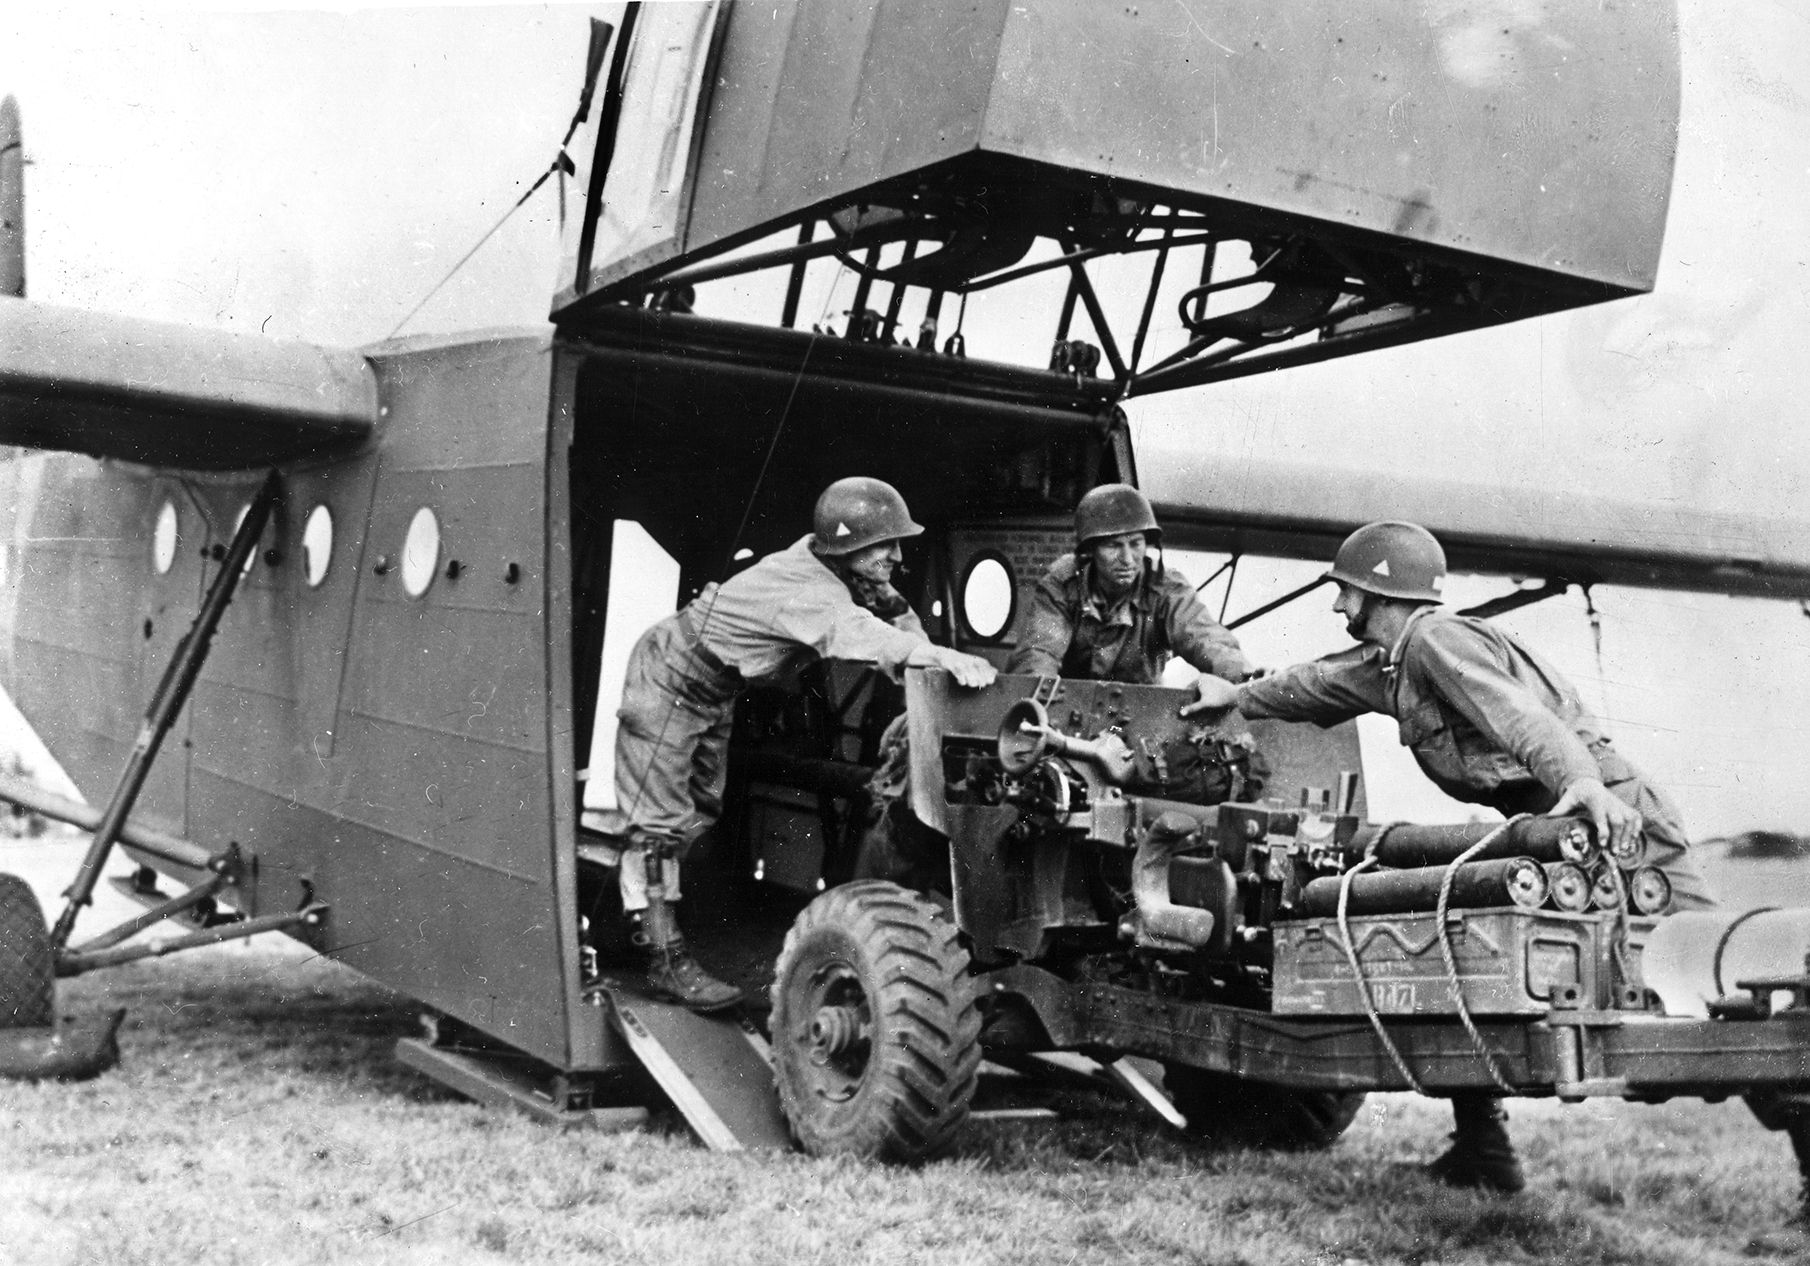 American airborne soldiers load a 57mm anti-tank gun through the nose of a glider in preparation for Operation Market-Garden. During the fighting in the Netherlands, the U.S. 82nd Airborne Division received three full battalions of airborne field artillery and two batteries of 57mm anti-tank guns for fire support.